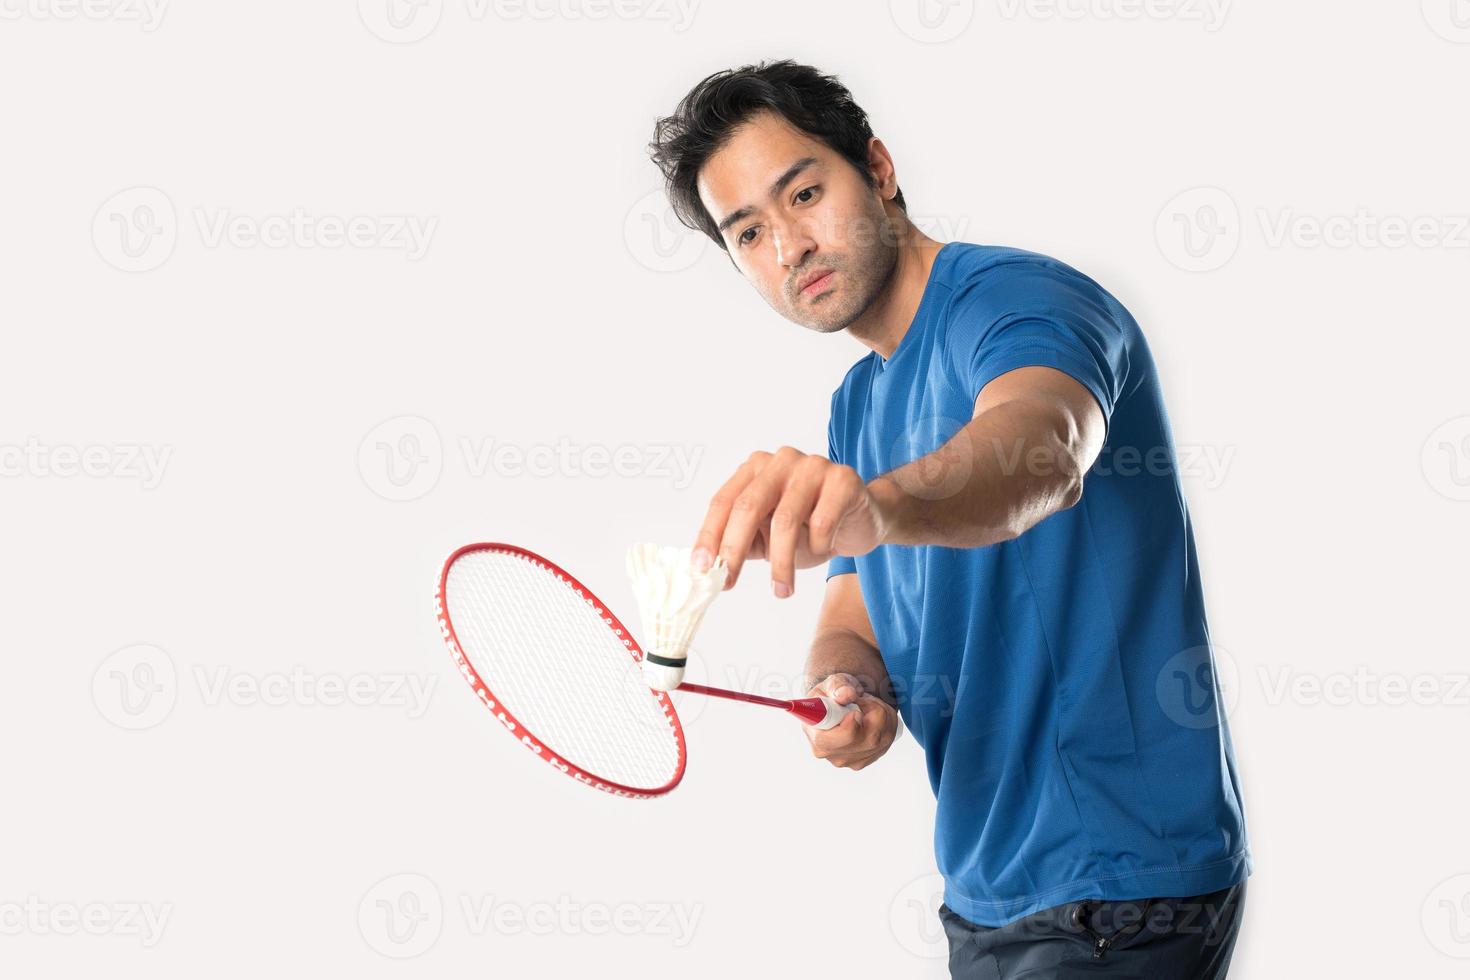 A badminton player in sportswear stands holding a racket and shuttlecock. photo